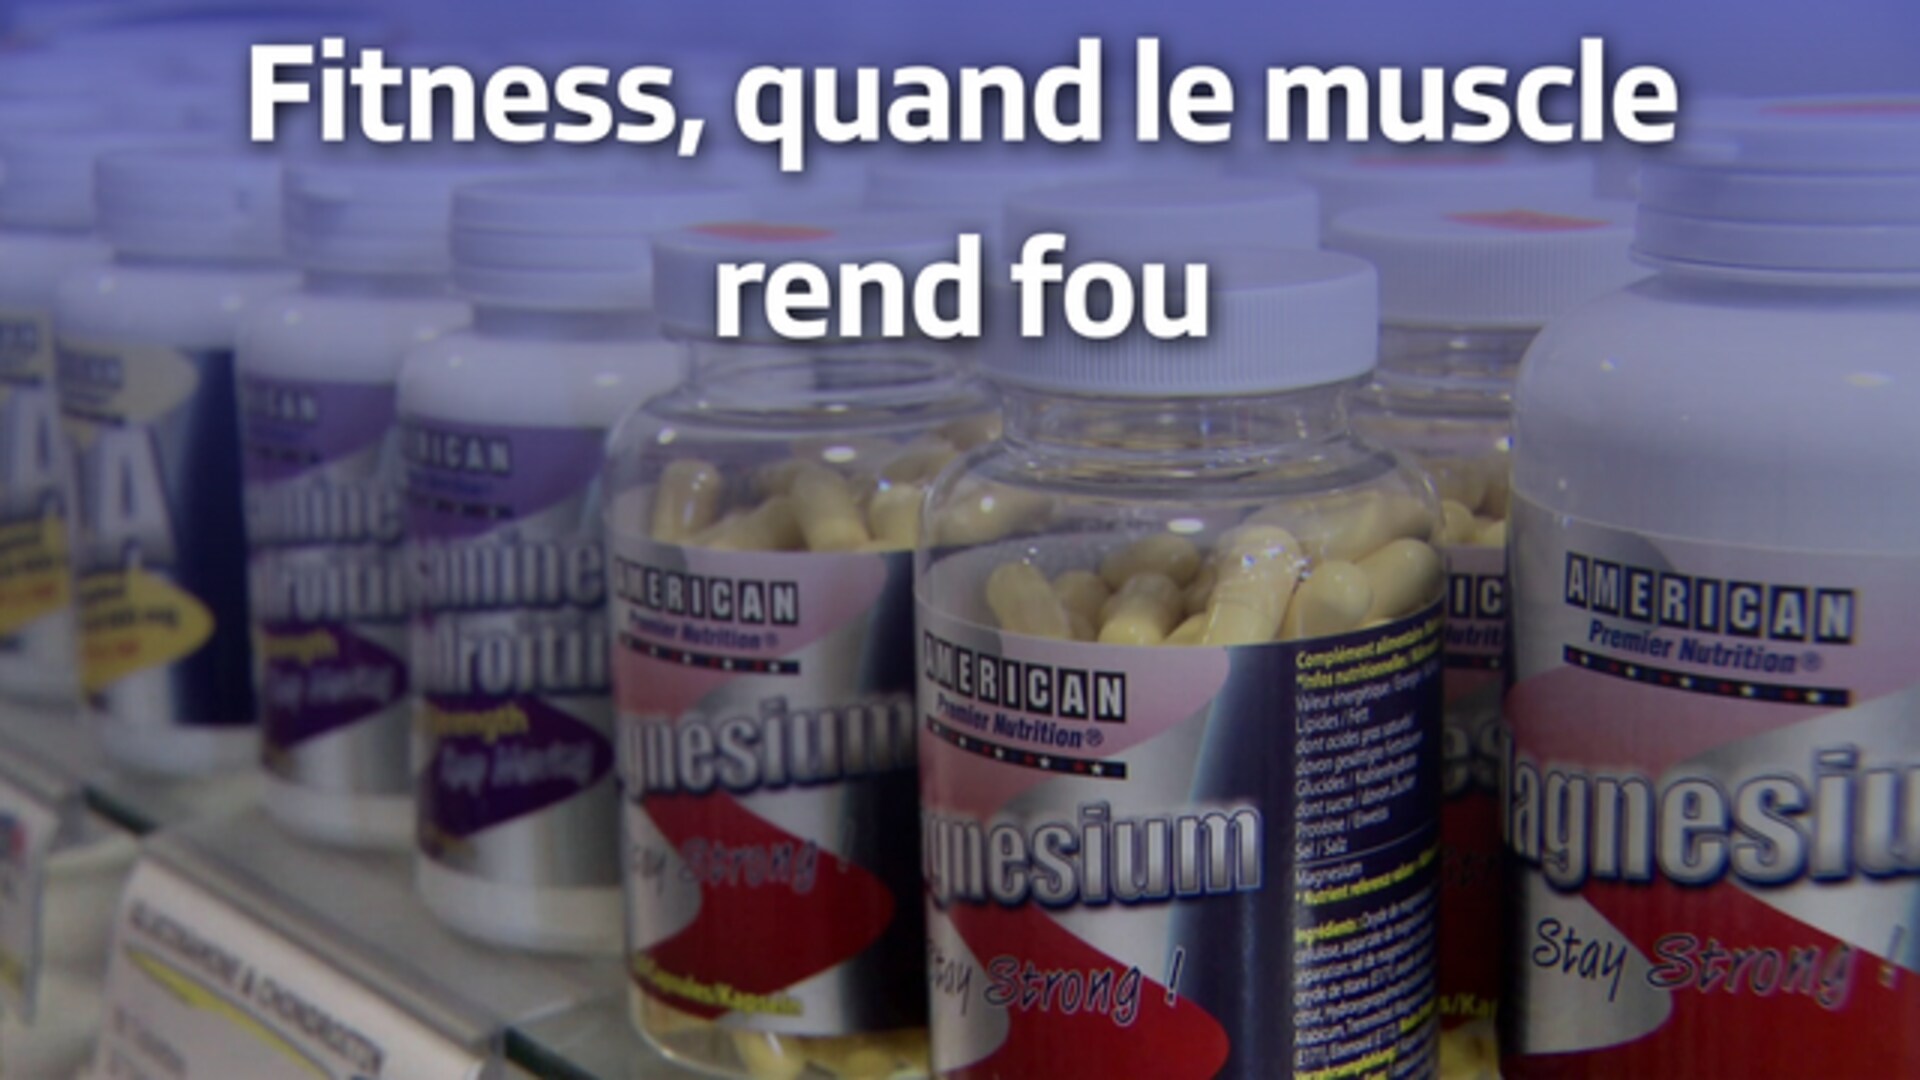 Fitness, quand le muscle rend fou